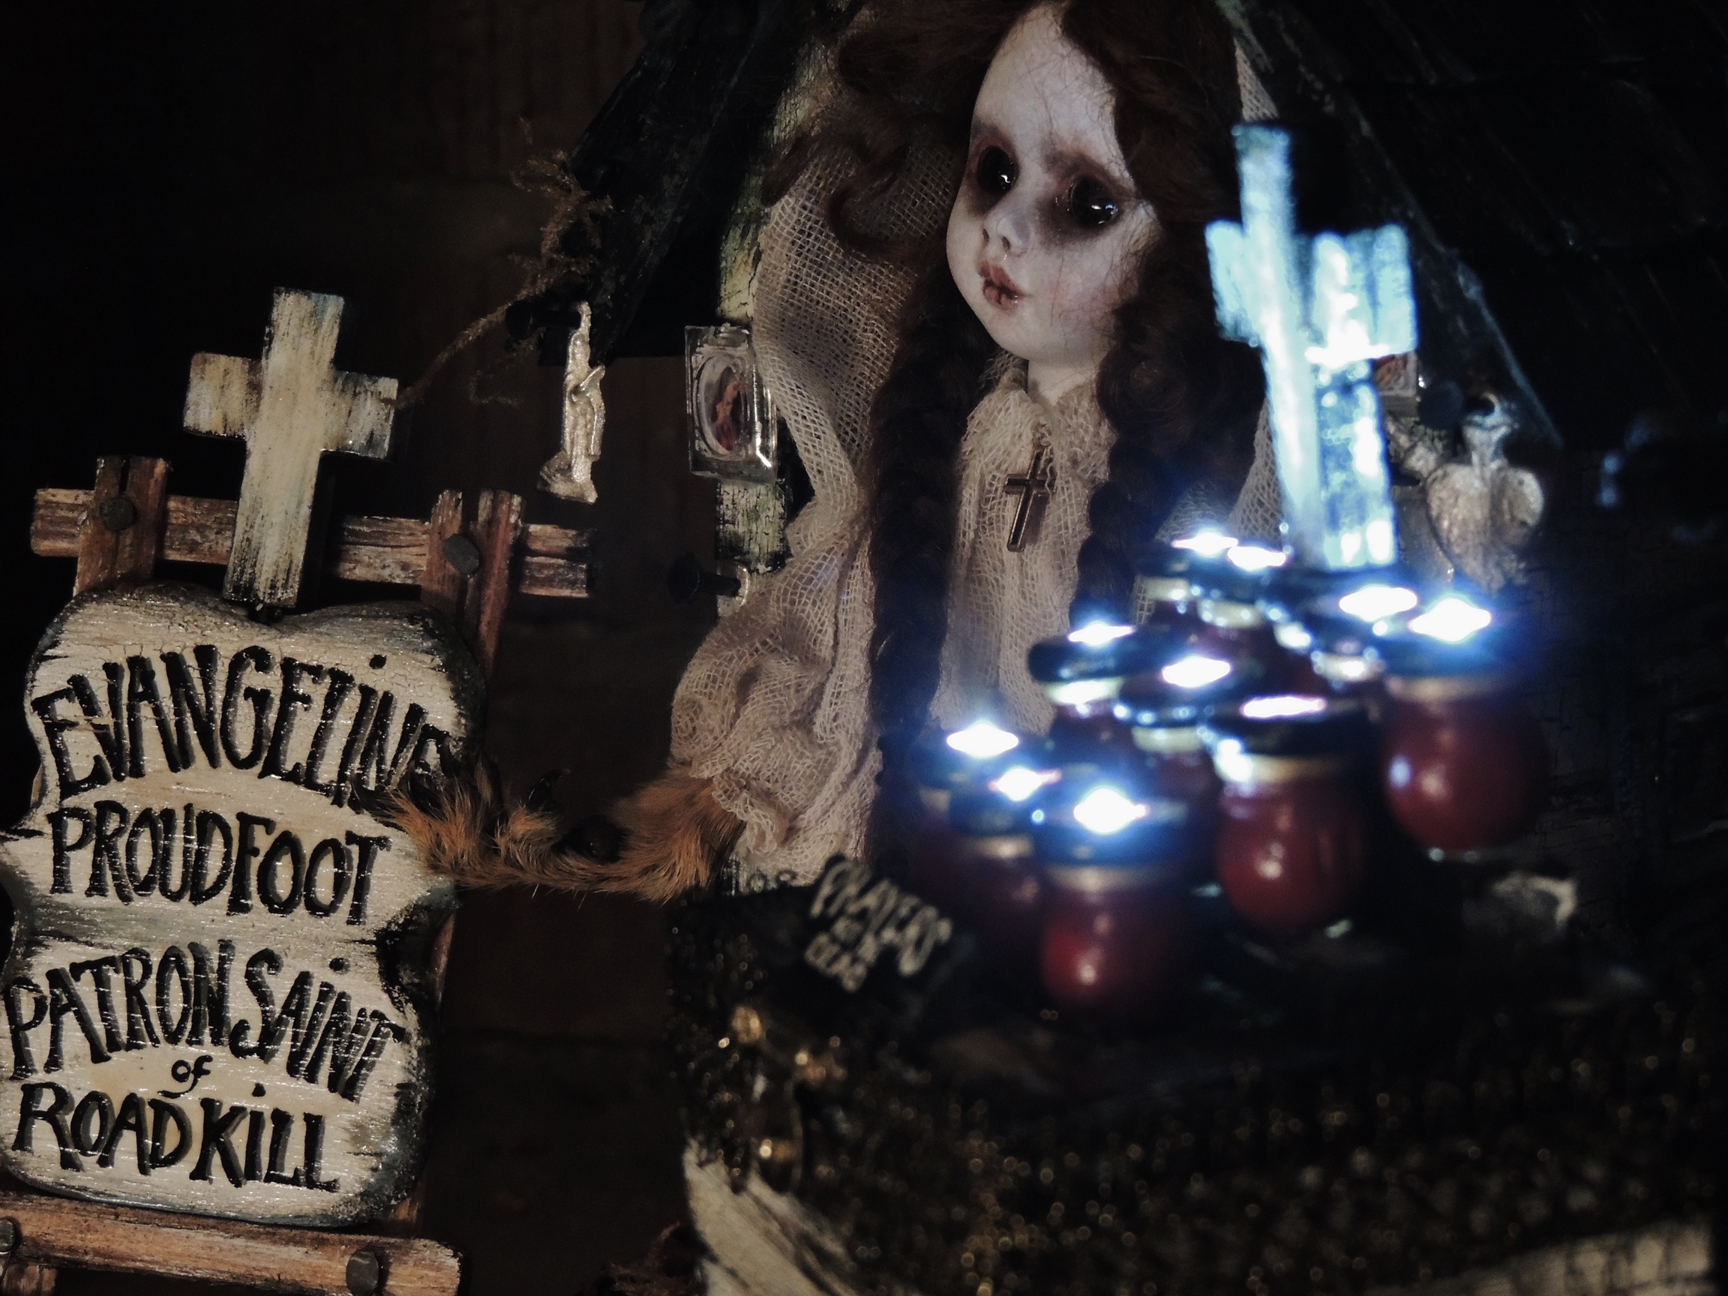 close-up of miniature mixed media taxidery assemblage of an altarpiece doll representing the Patron Saint of Roadkill